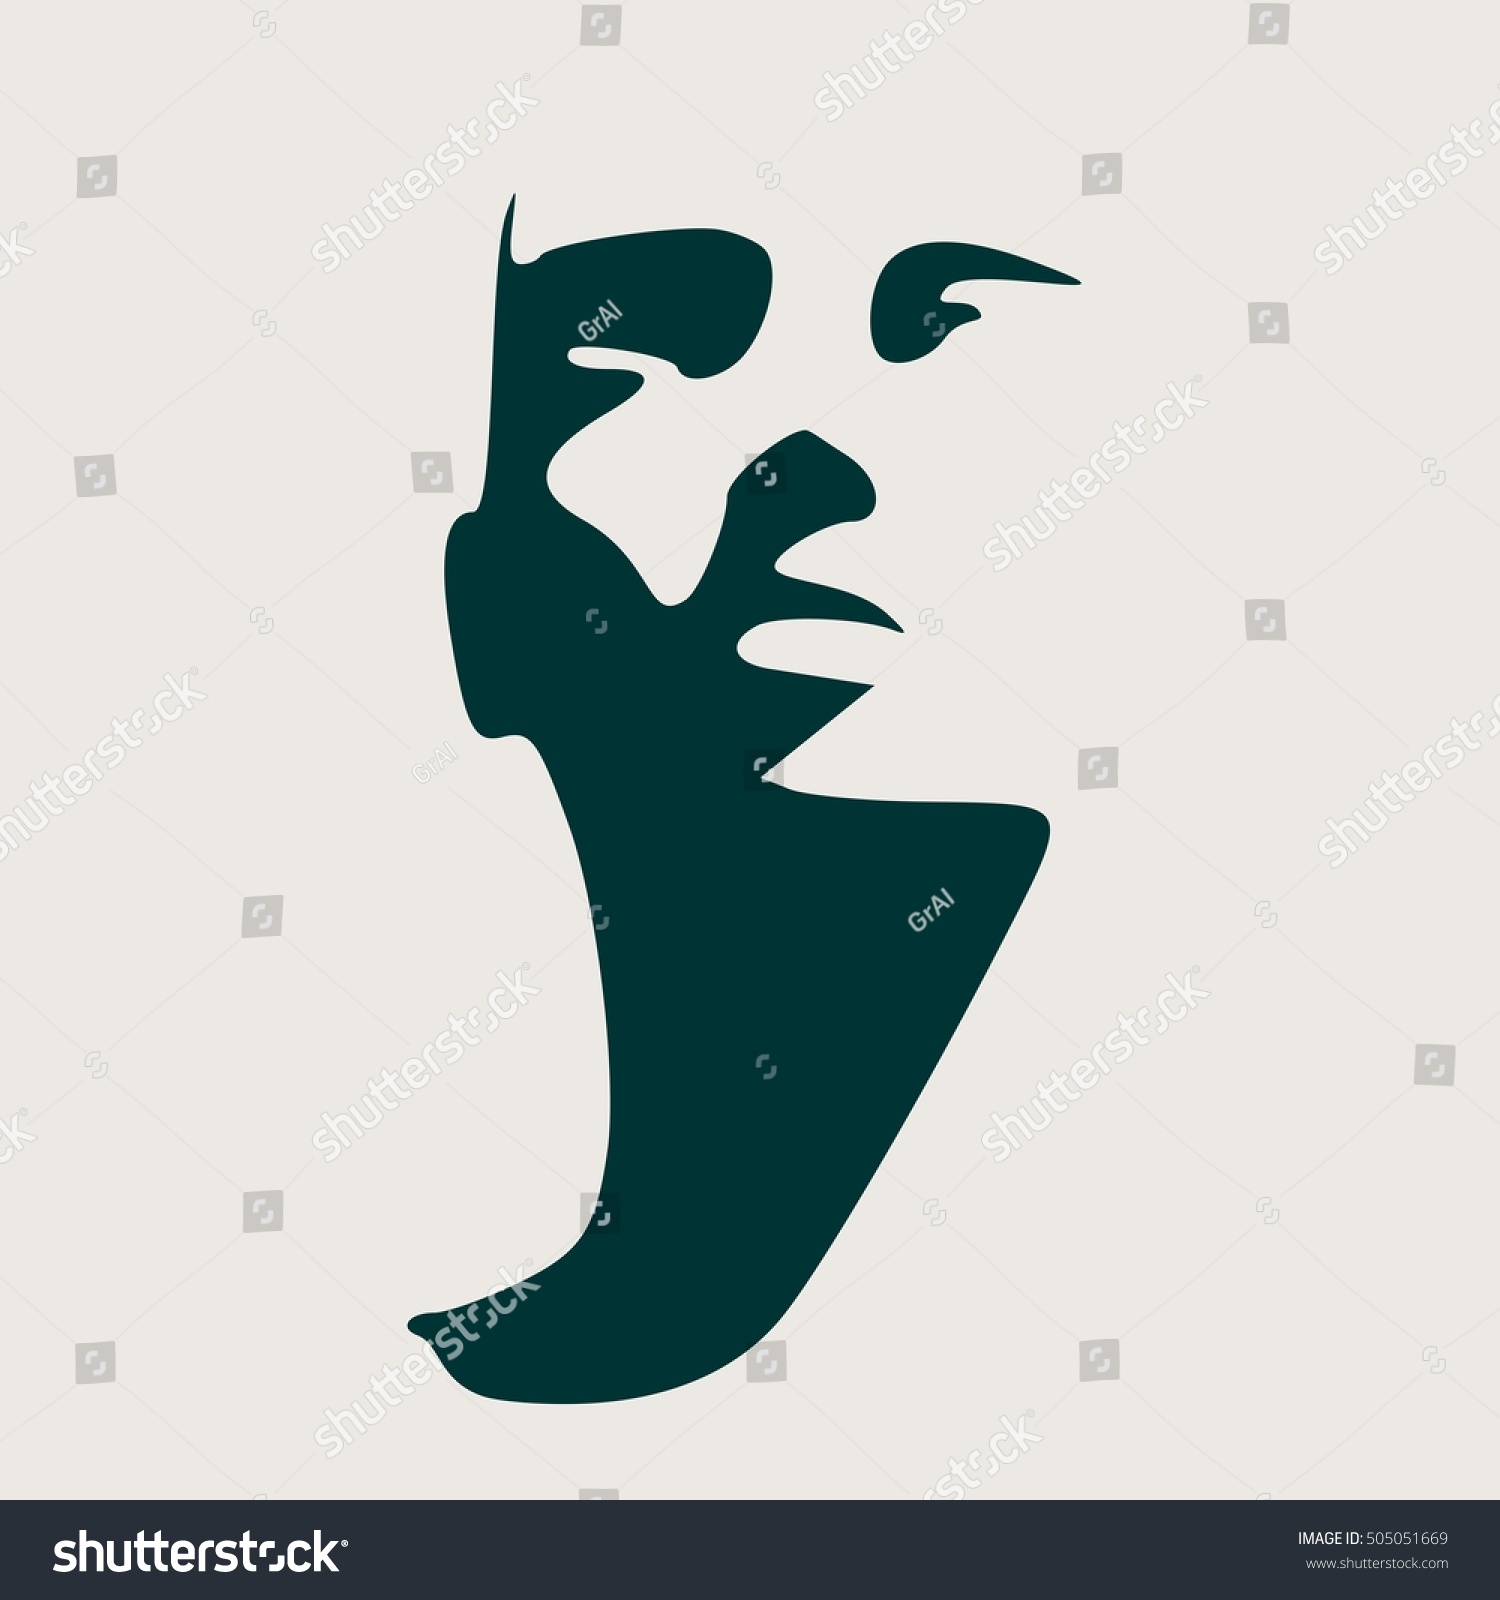 Download Human Head Silhouette Face Front View Stock Vector ...